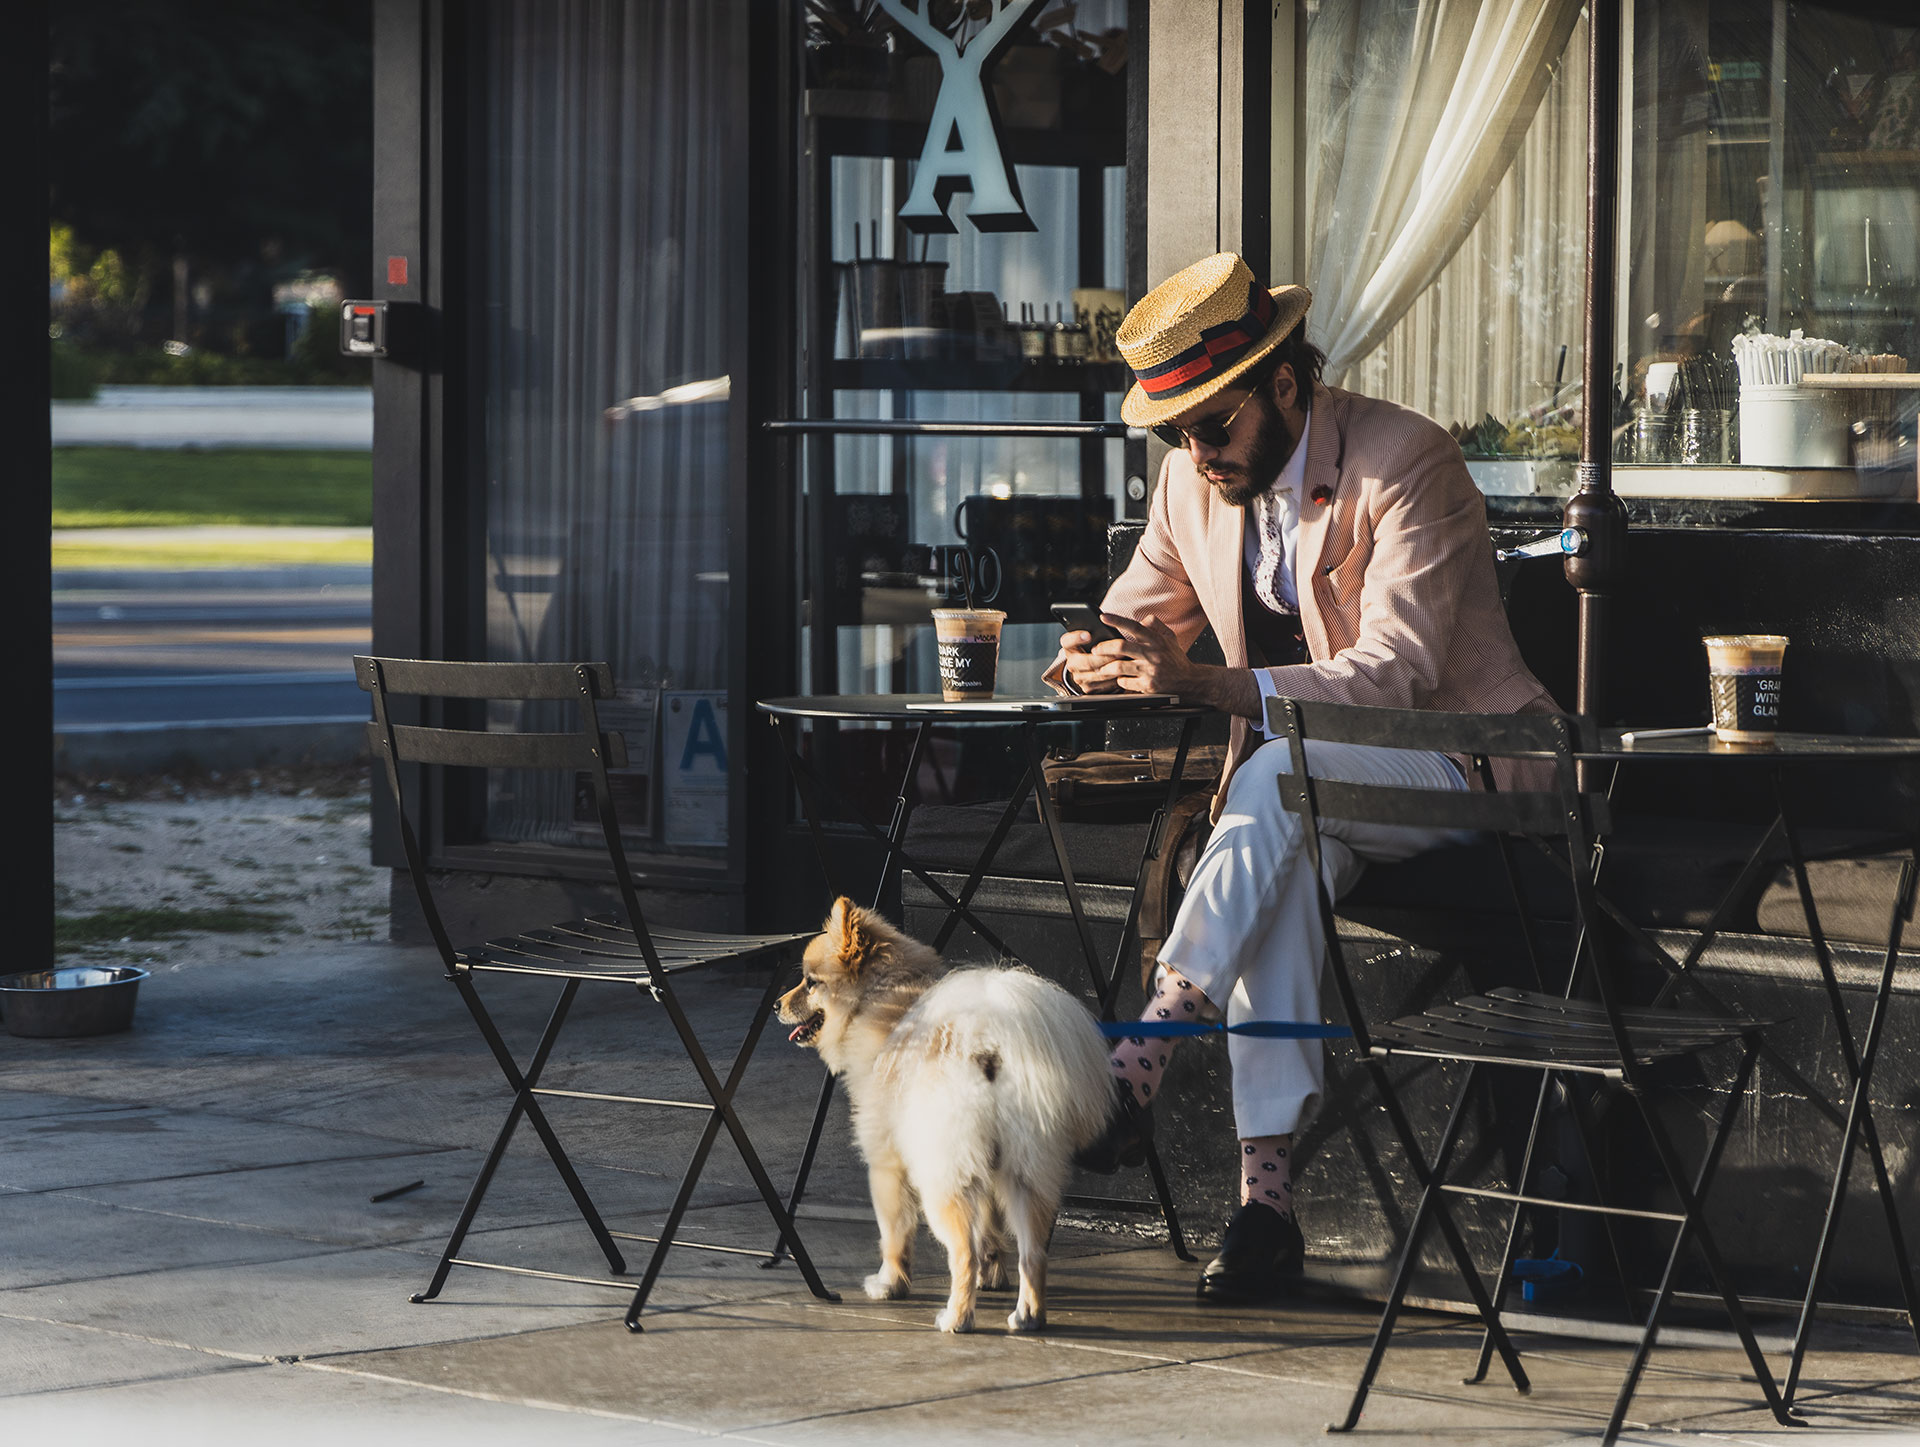 Dandy in Beverly Hills enjoying his coffee with his dog